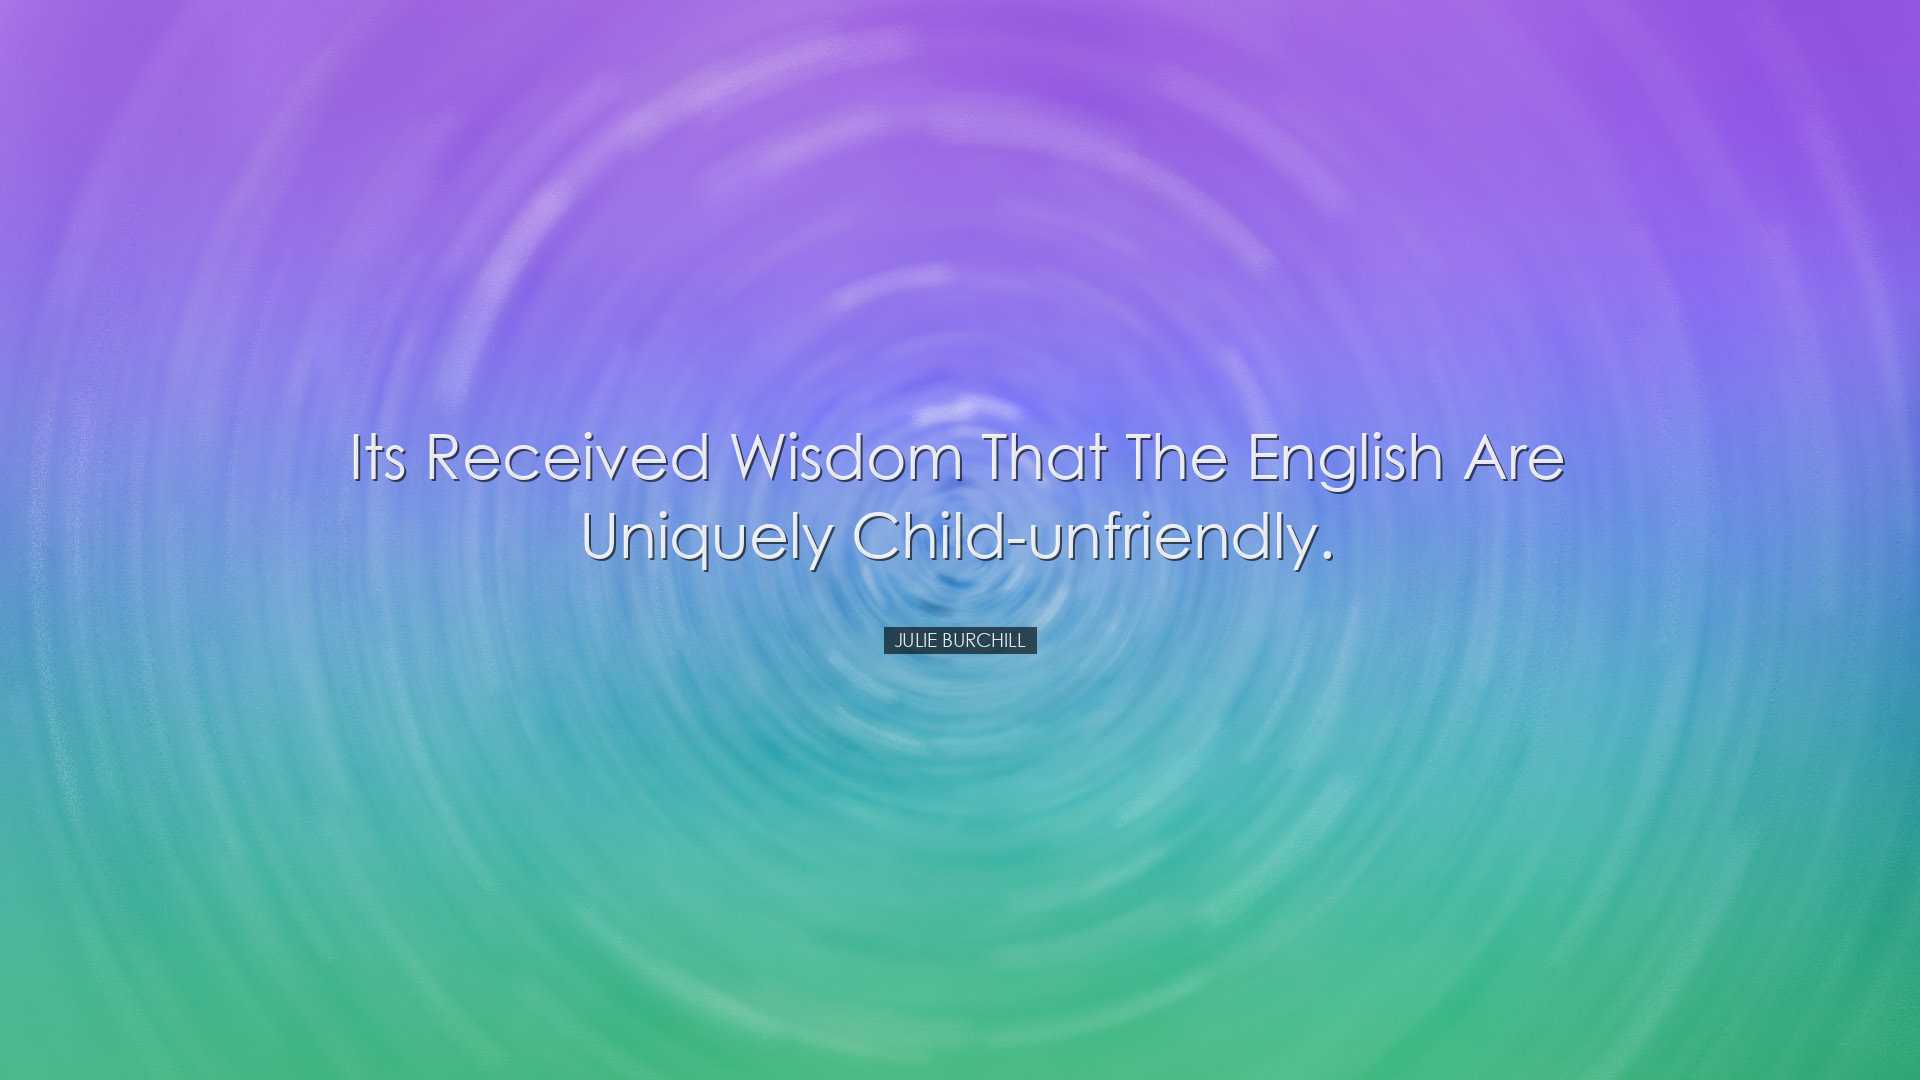 Its received wisdom that the English are uniquely child-unfriendly